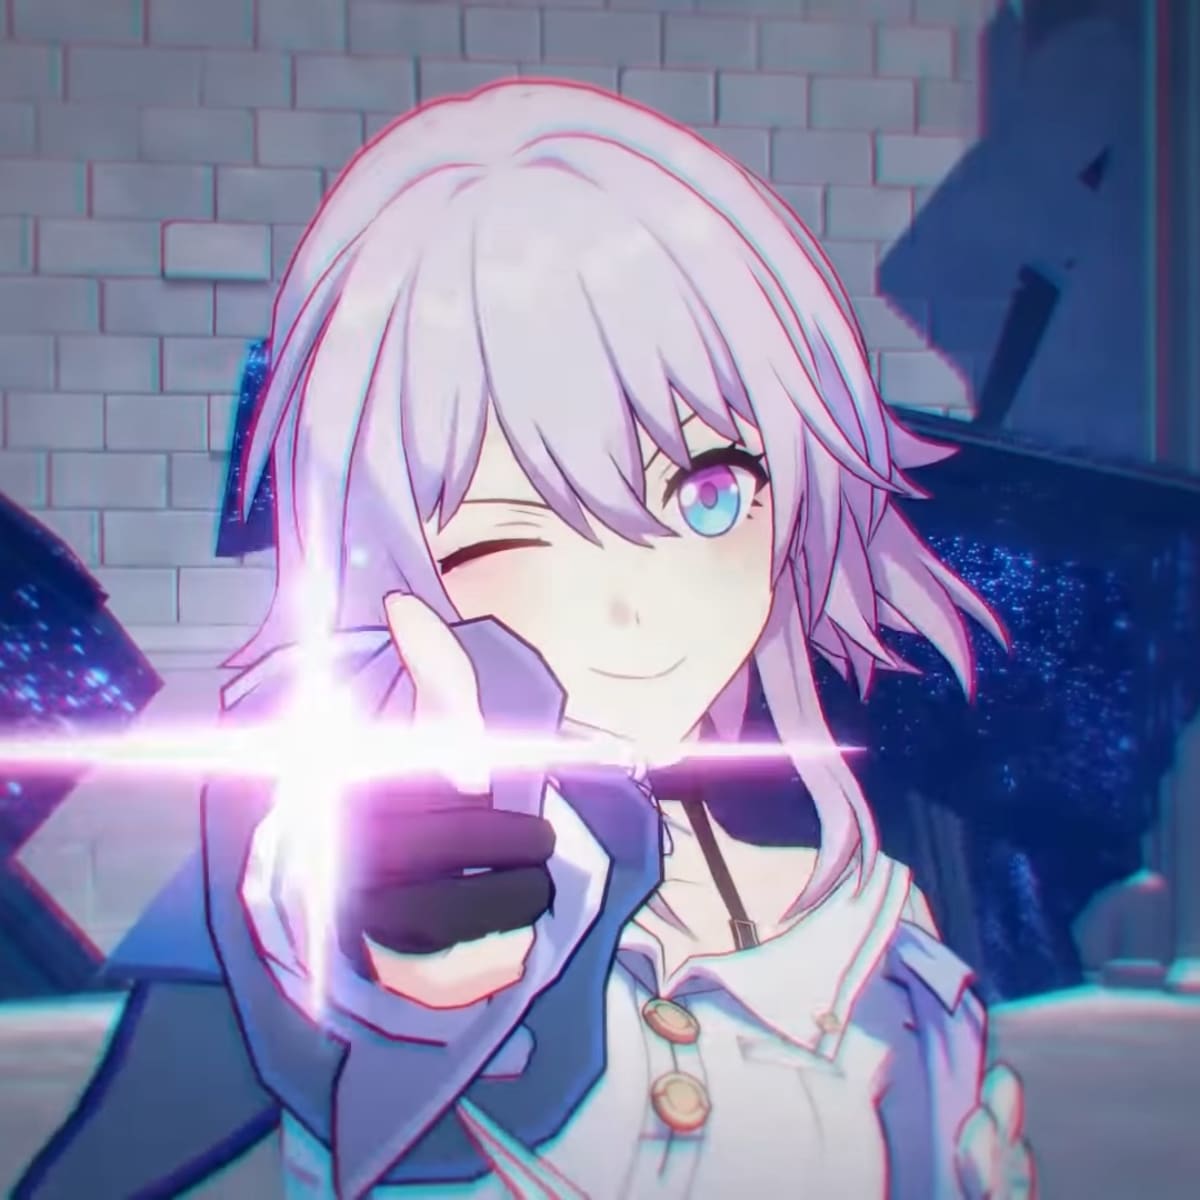 Honkai: Star Rail will soon come to PlayStation!